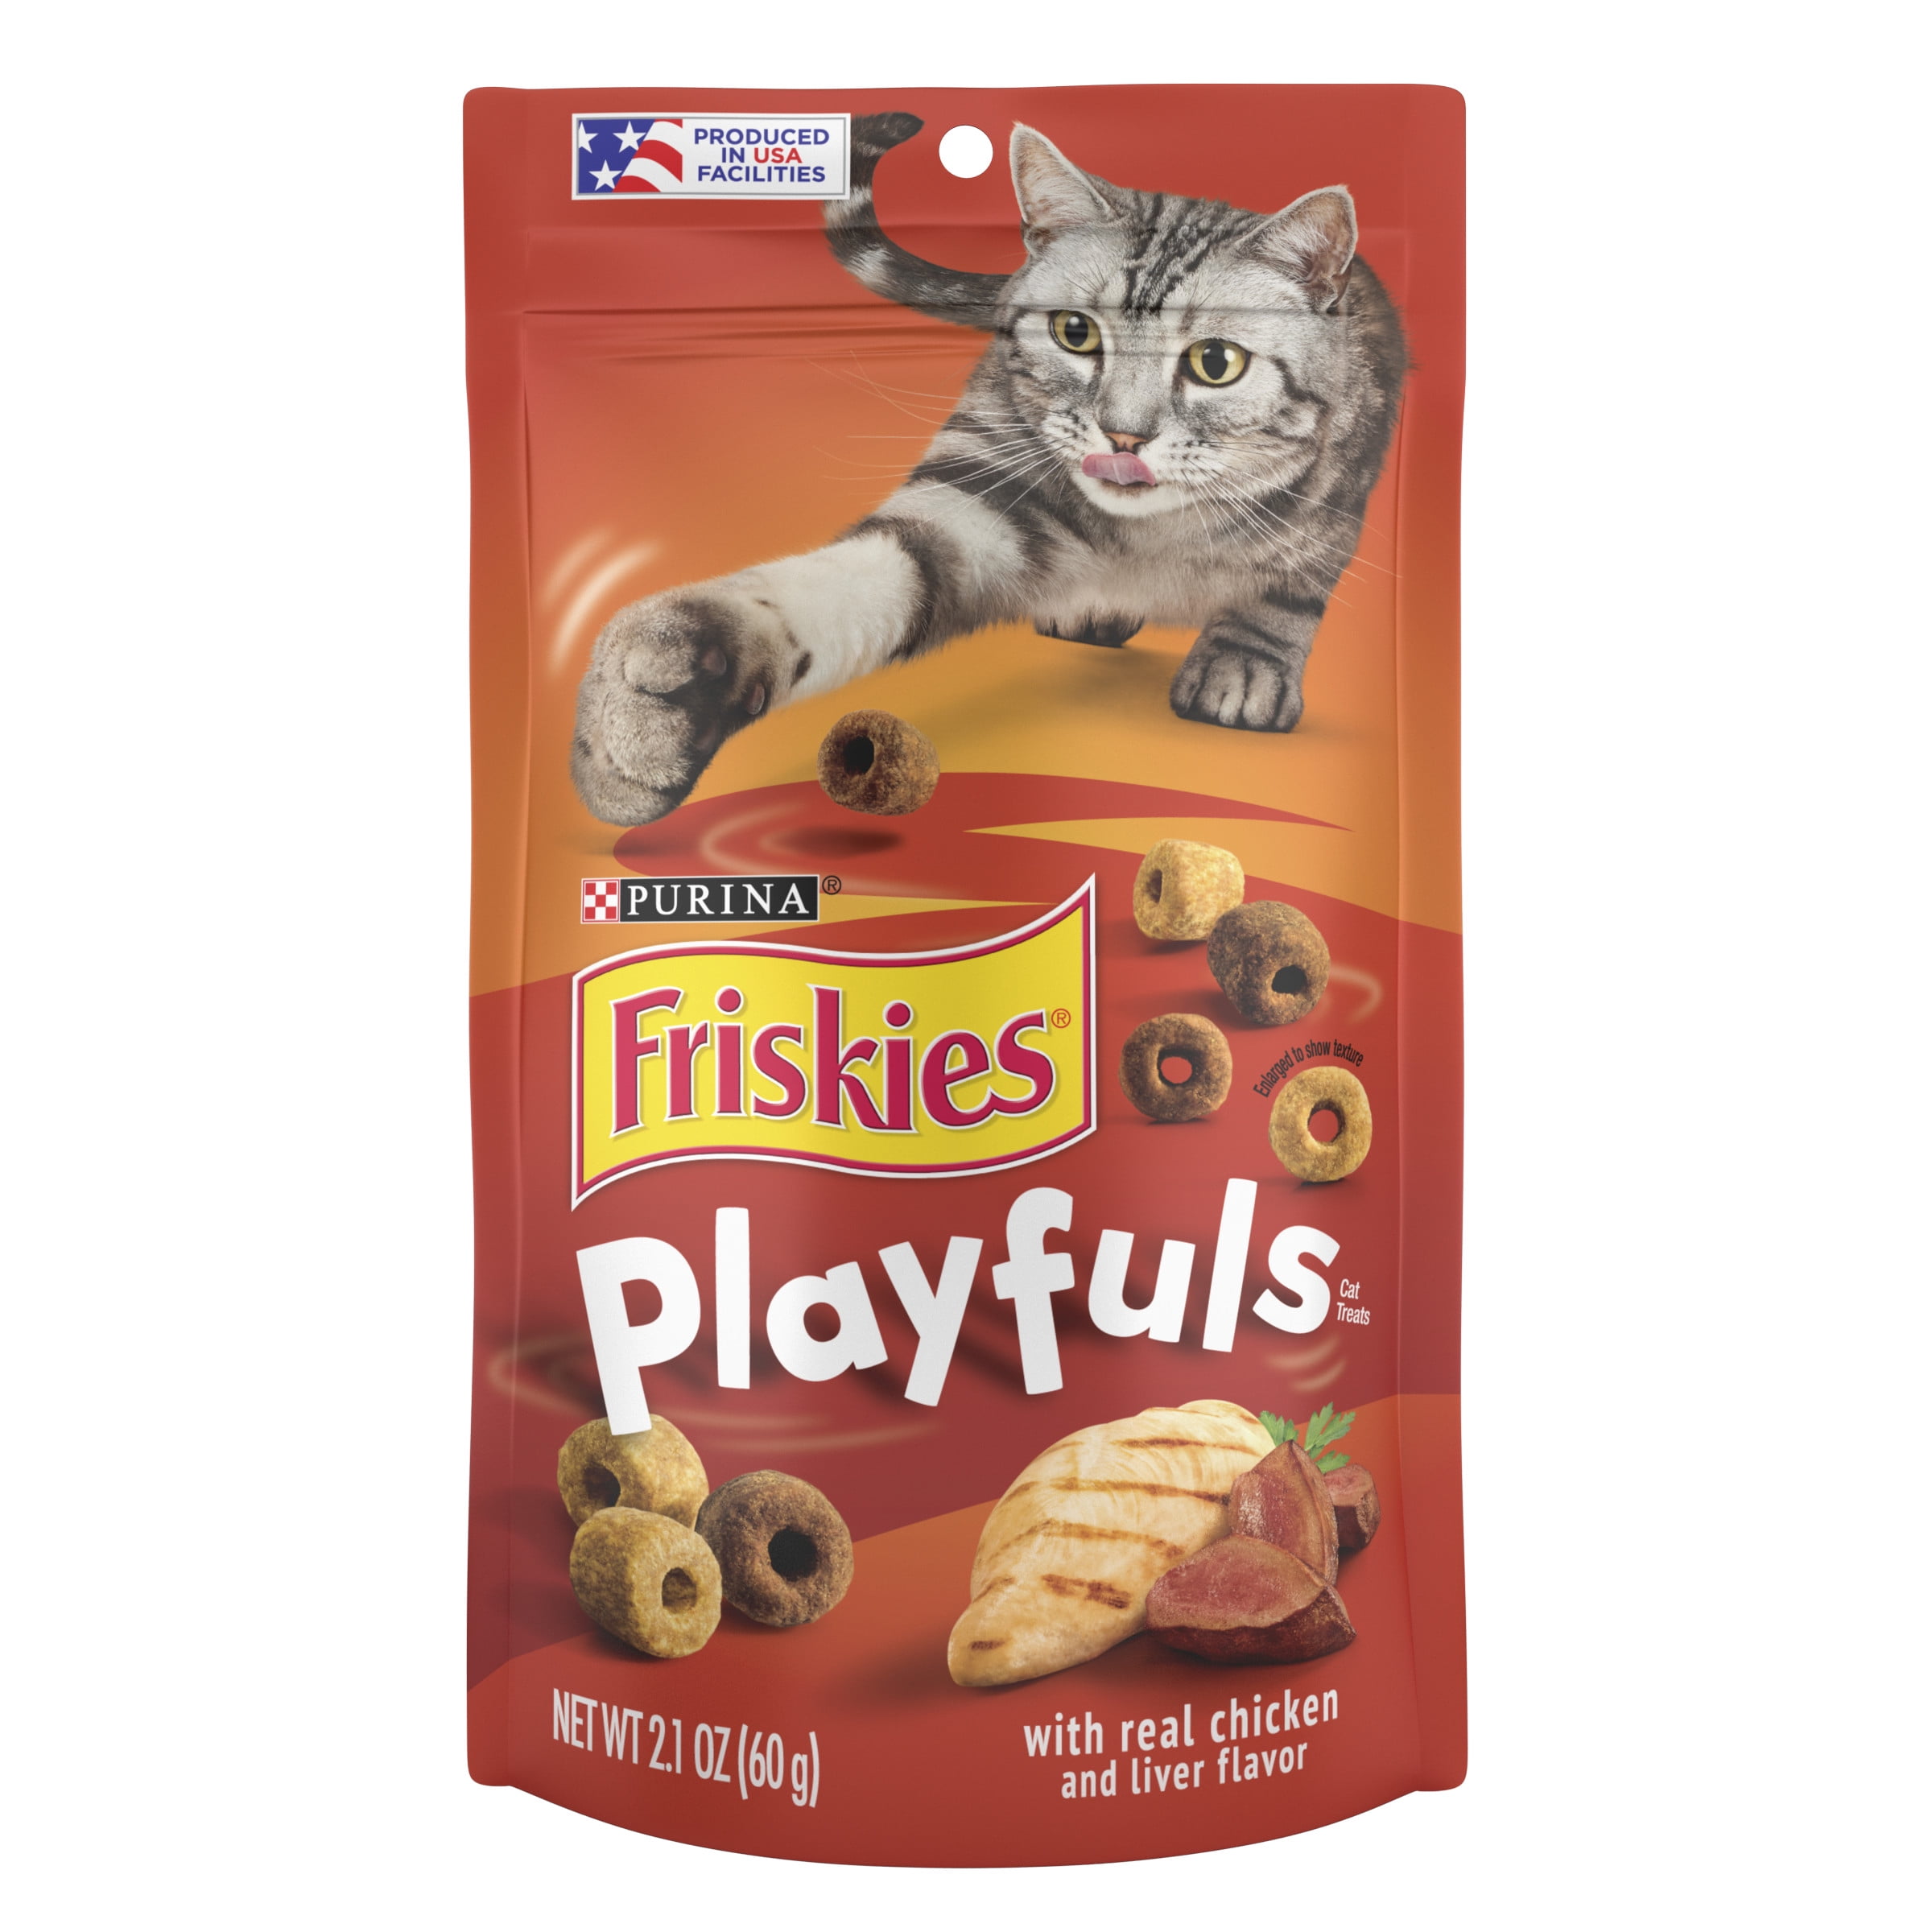 Purina Friskies Playfuls Chicken & Liver Flavor Treats for Cats, 2.1 oz Pouch